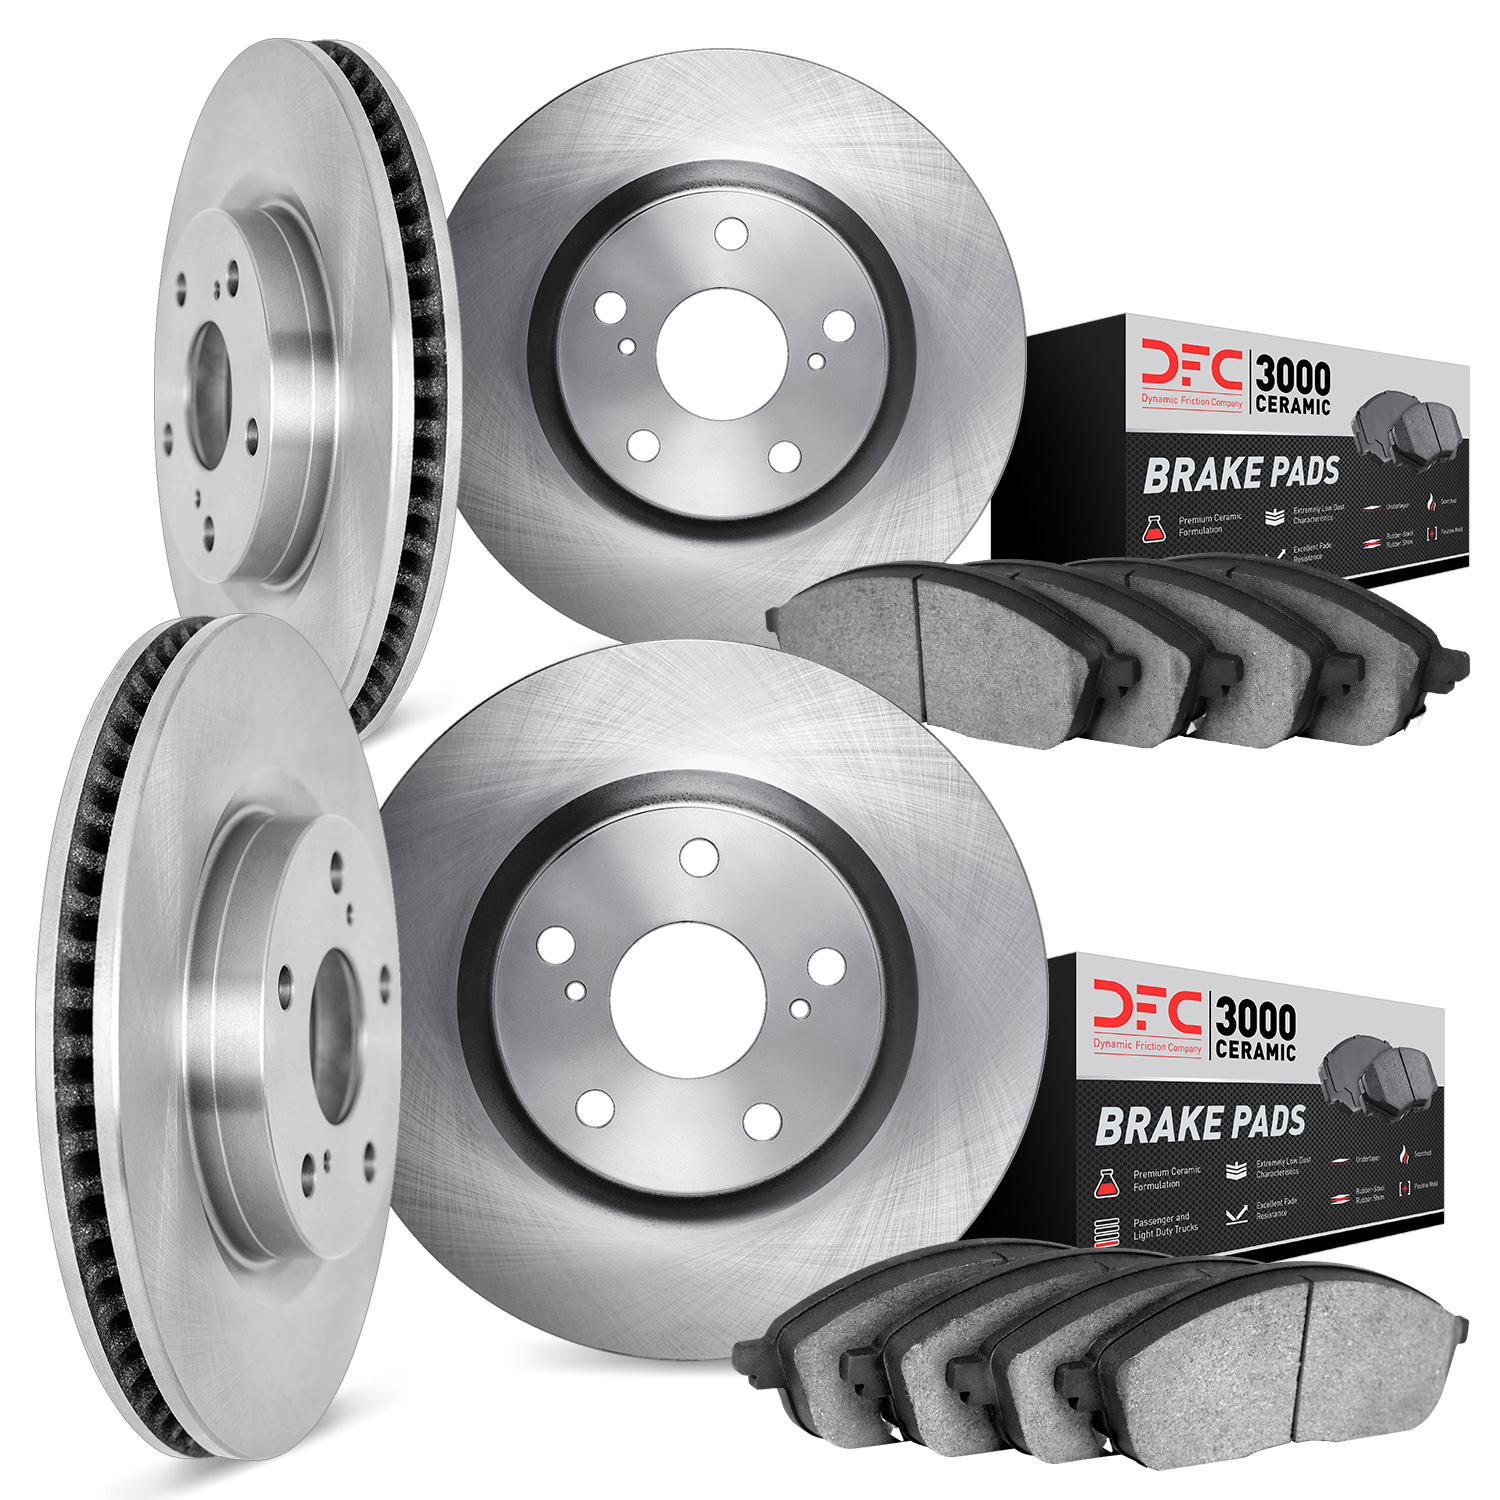 6304-75001 Brake Rotors with 3000-Series Ceramic Brake Pads Kit, 1990-1990 Lexus/Toyota/Scion, Position: Front and Rear